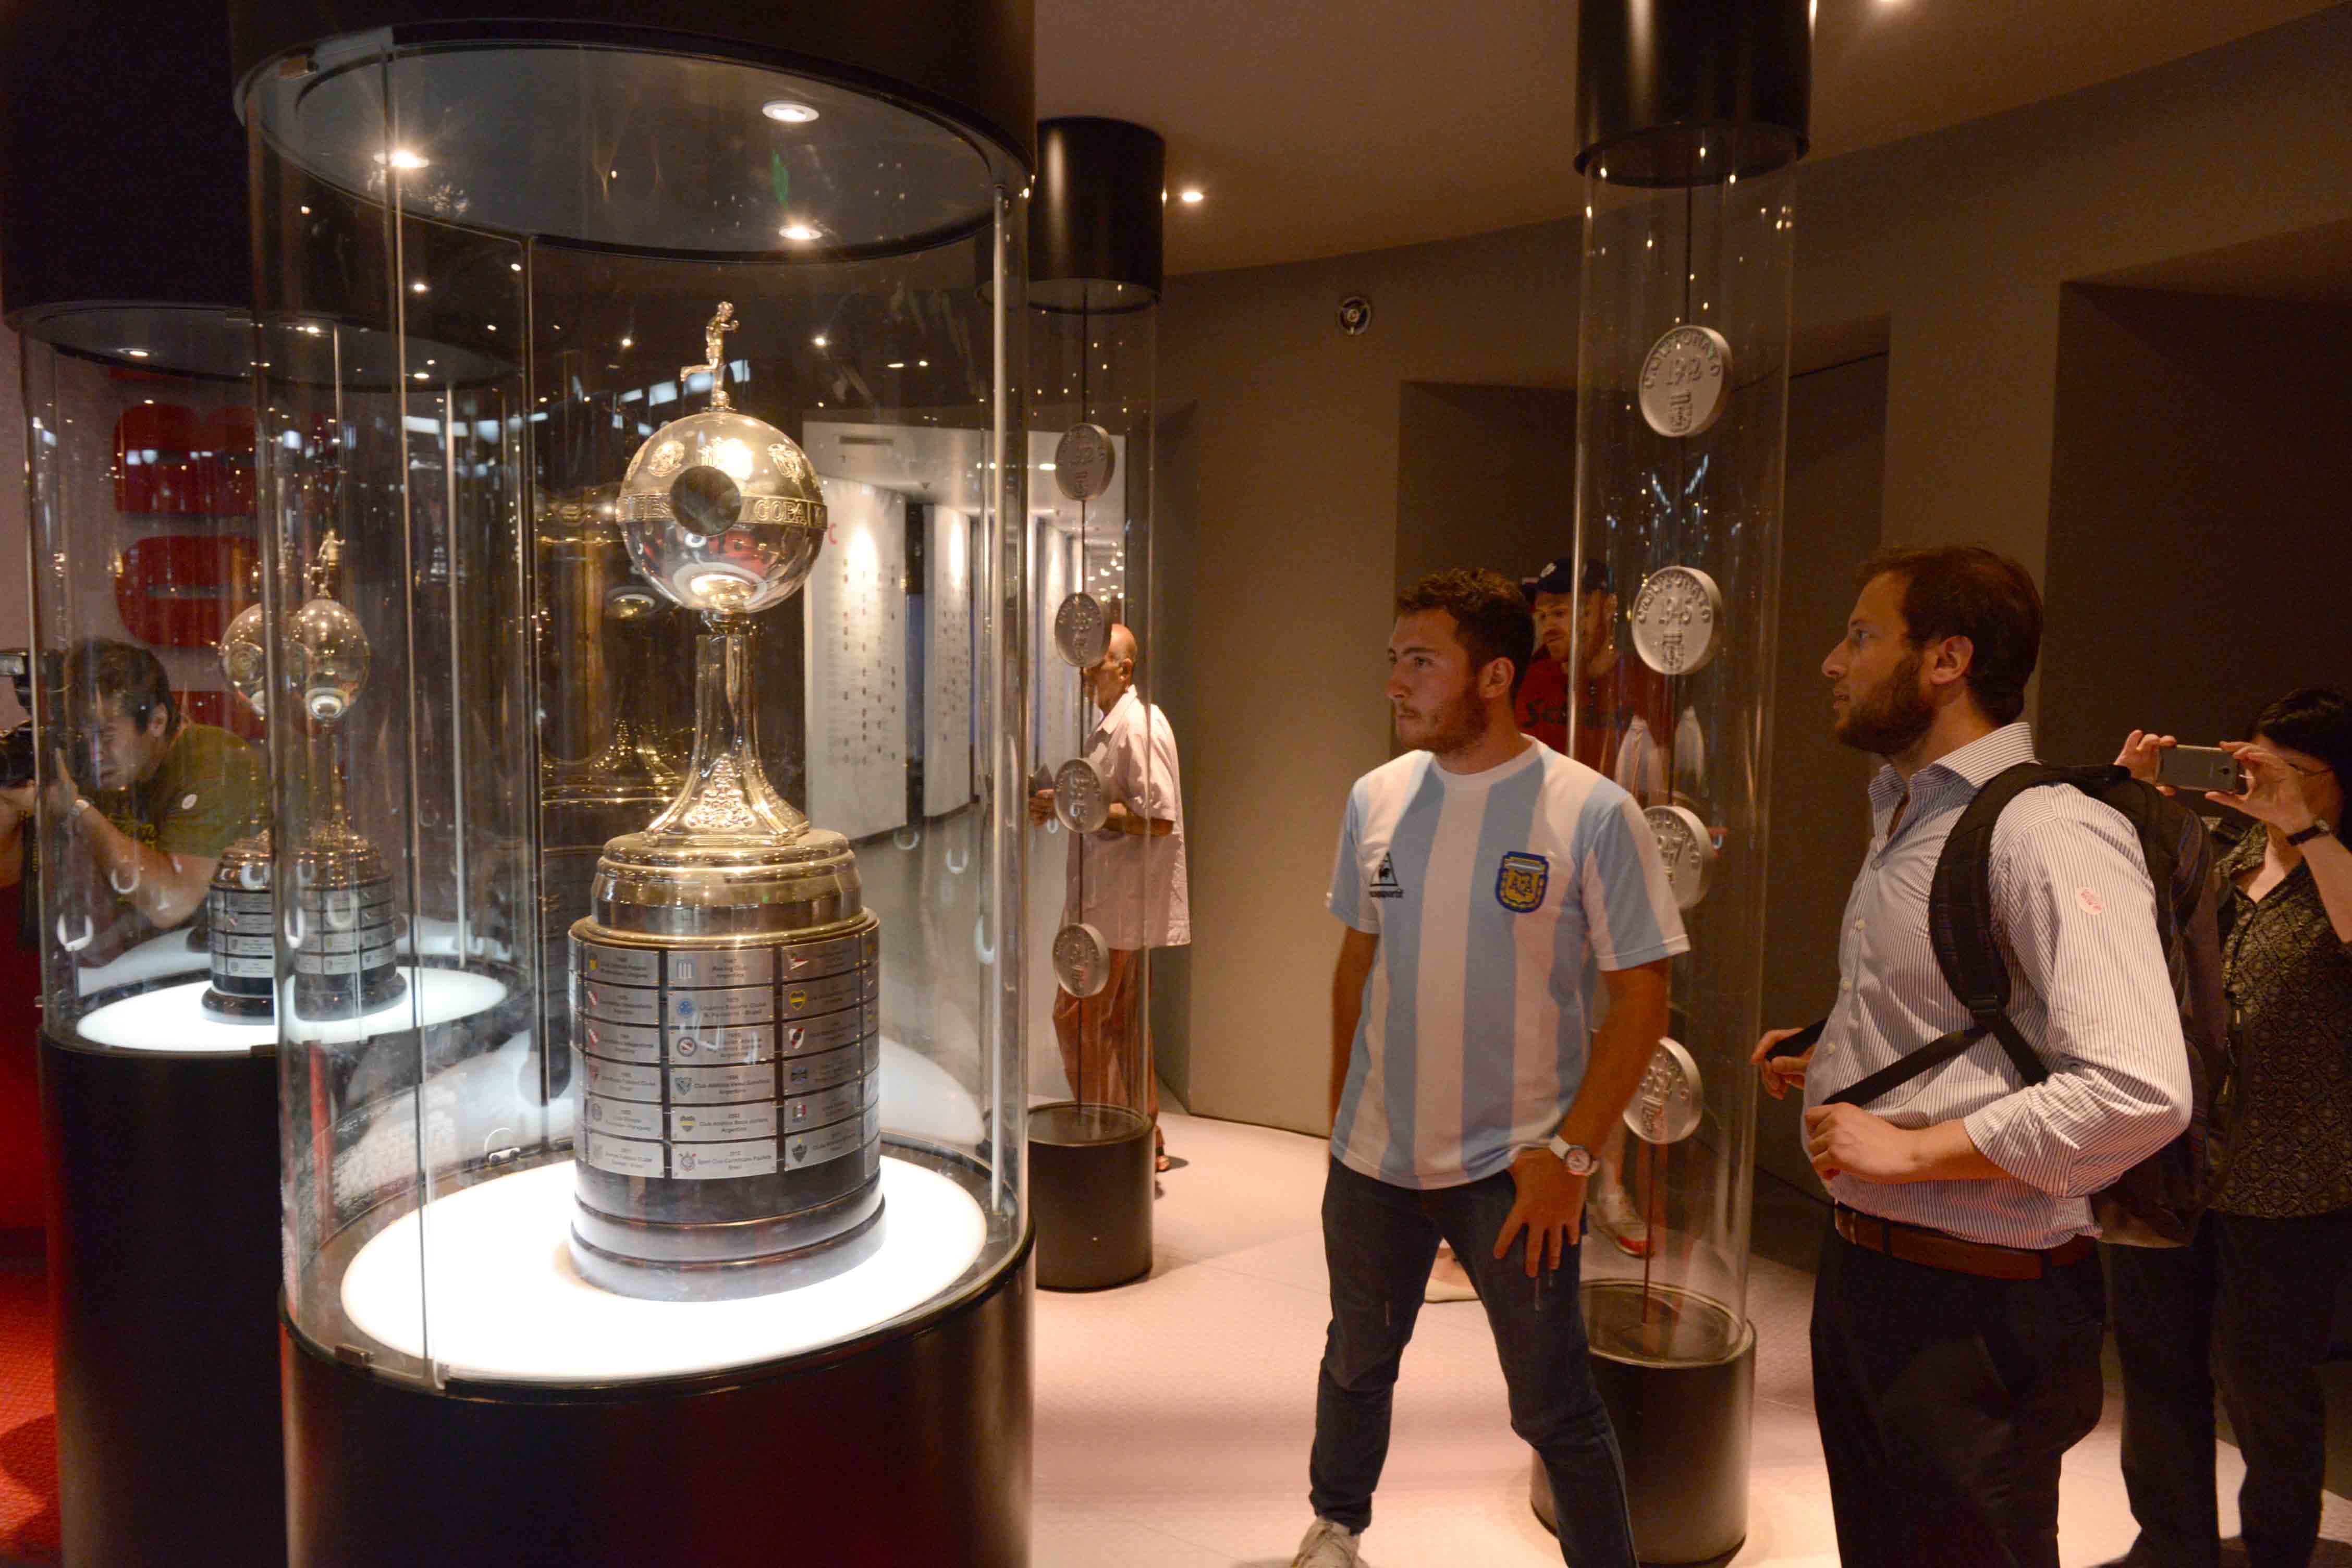 Museo River